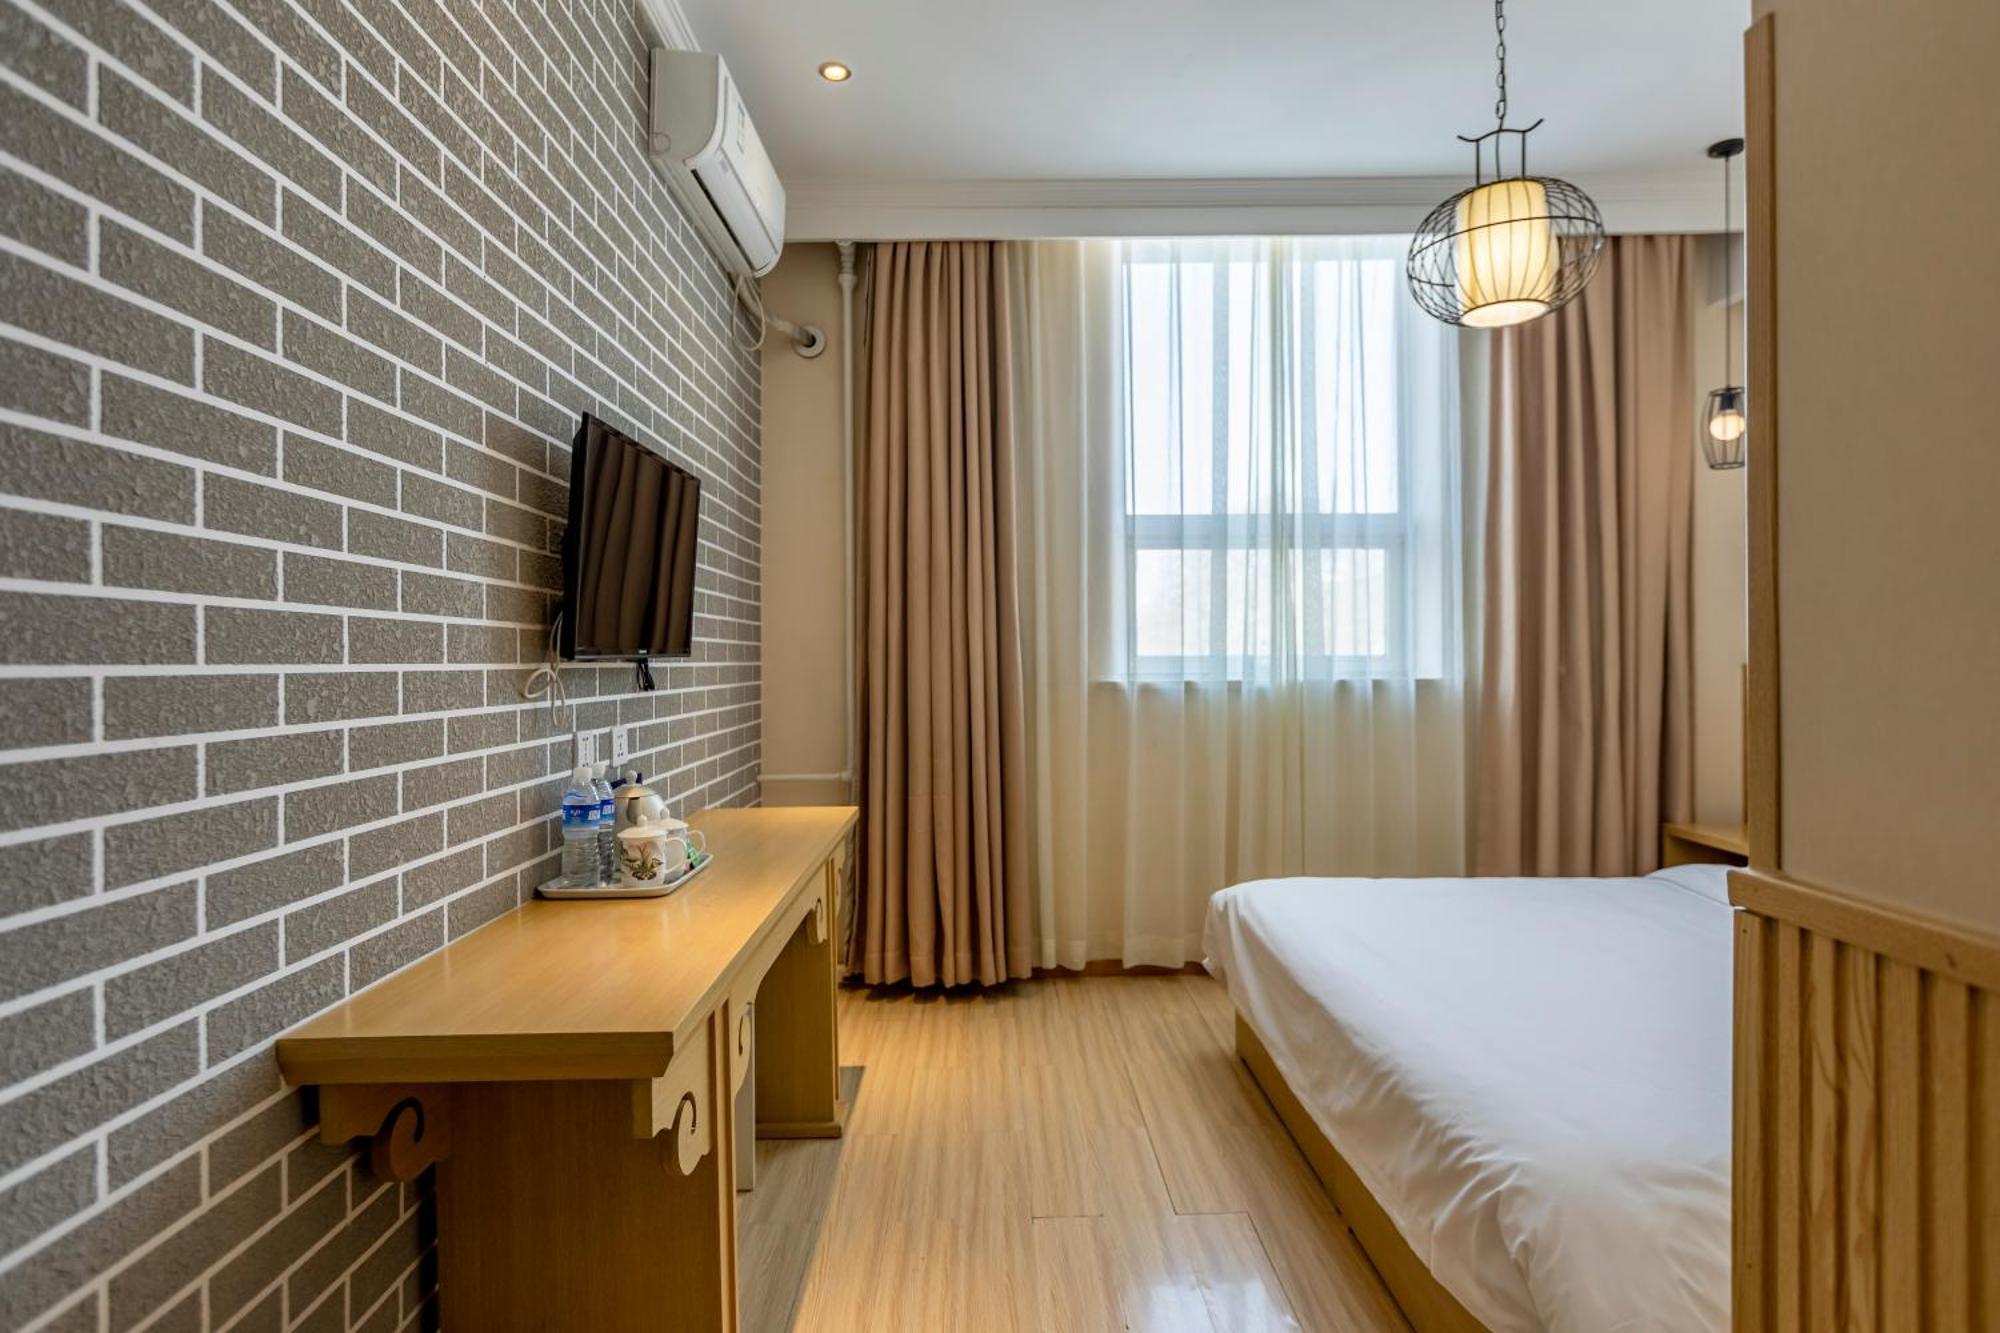 Happy Dragon Alley Hotel-In The City Center With Big Window&Free Coffe, Fluent English Speaking,Tourist Attractions Ticket Service&Food Recommendation,Near Tian Anmen Forbiddencity,Near Lama Temple,Easy To Walk To Nanluoalley&Shichahai Beijing Bagian luar foto